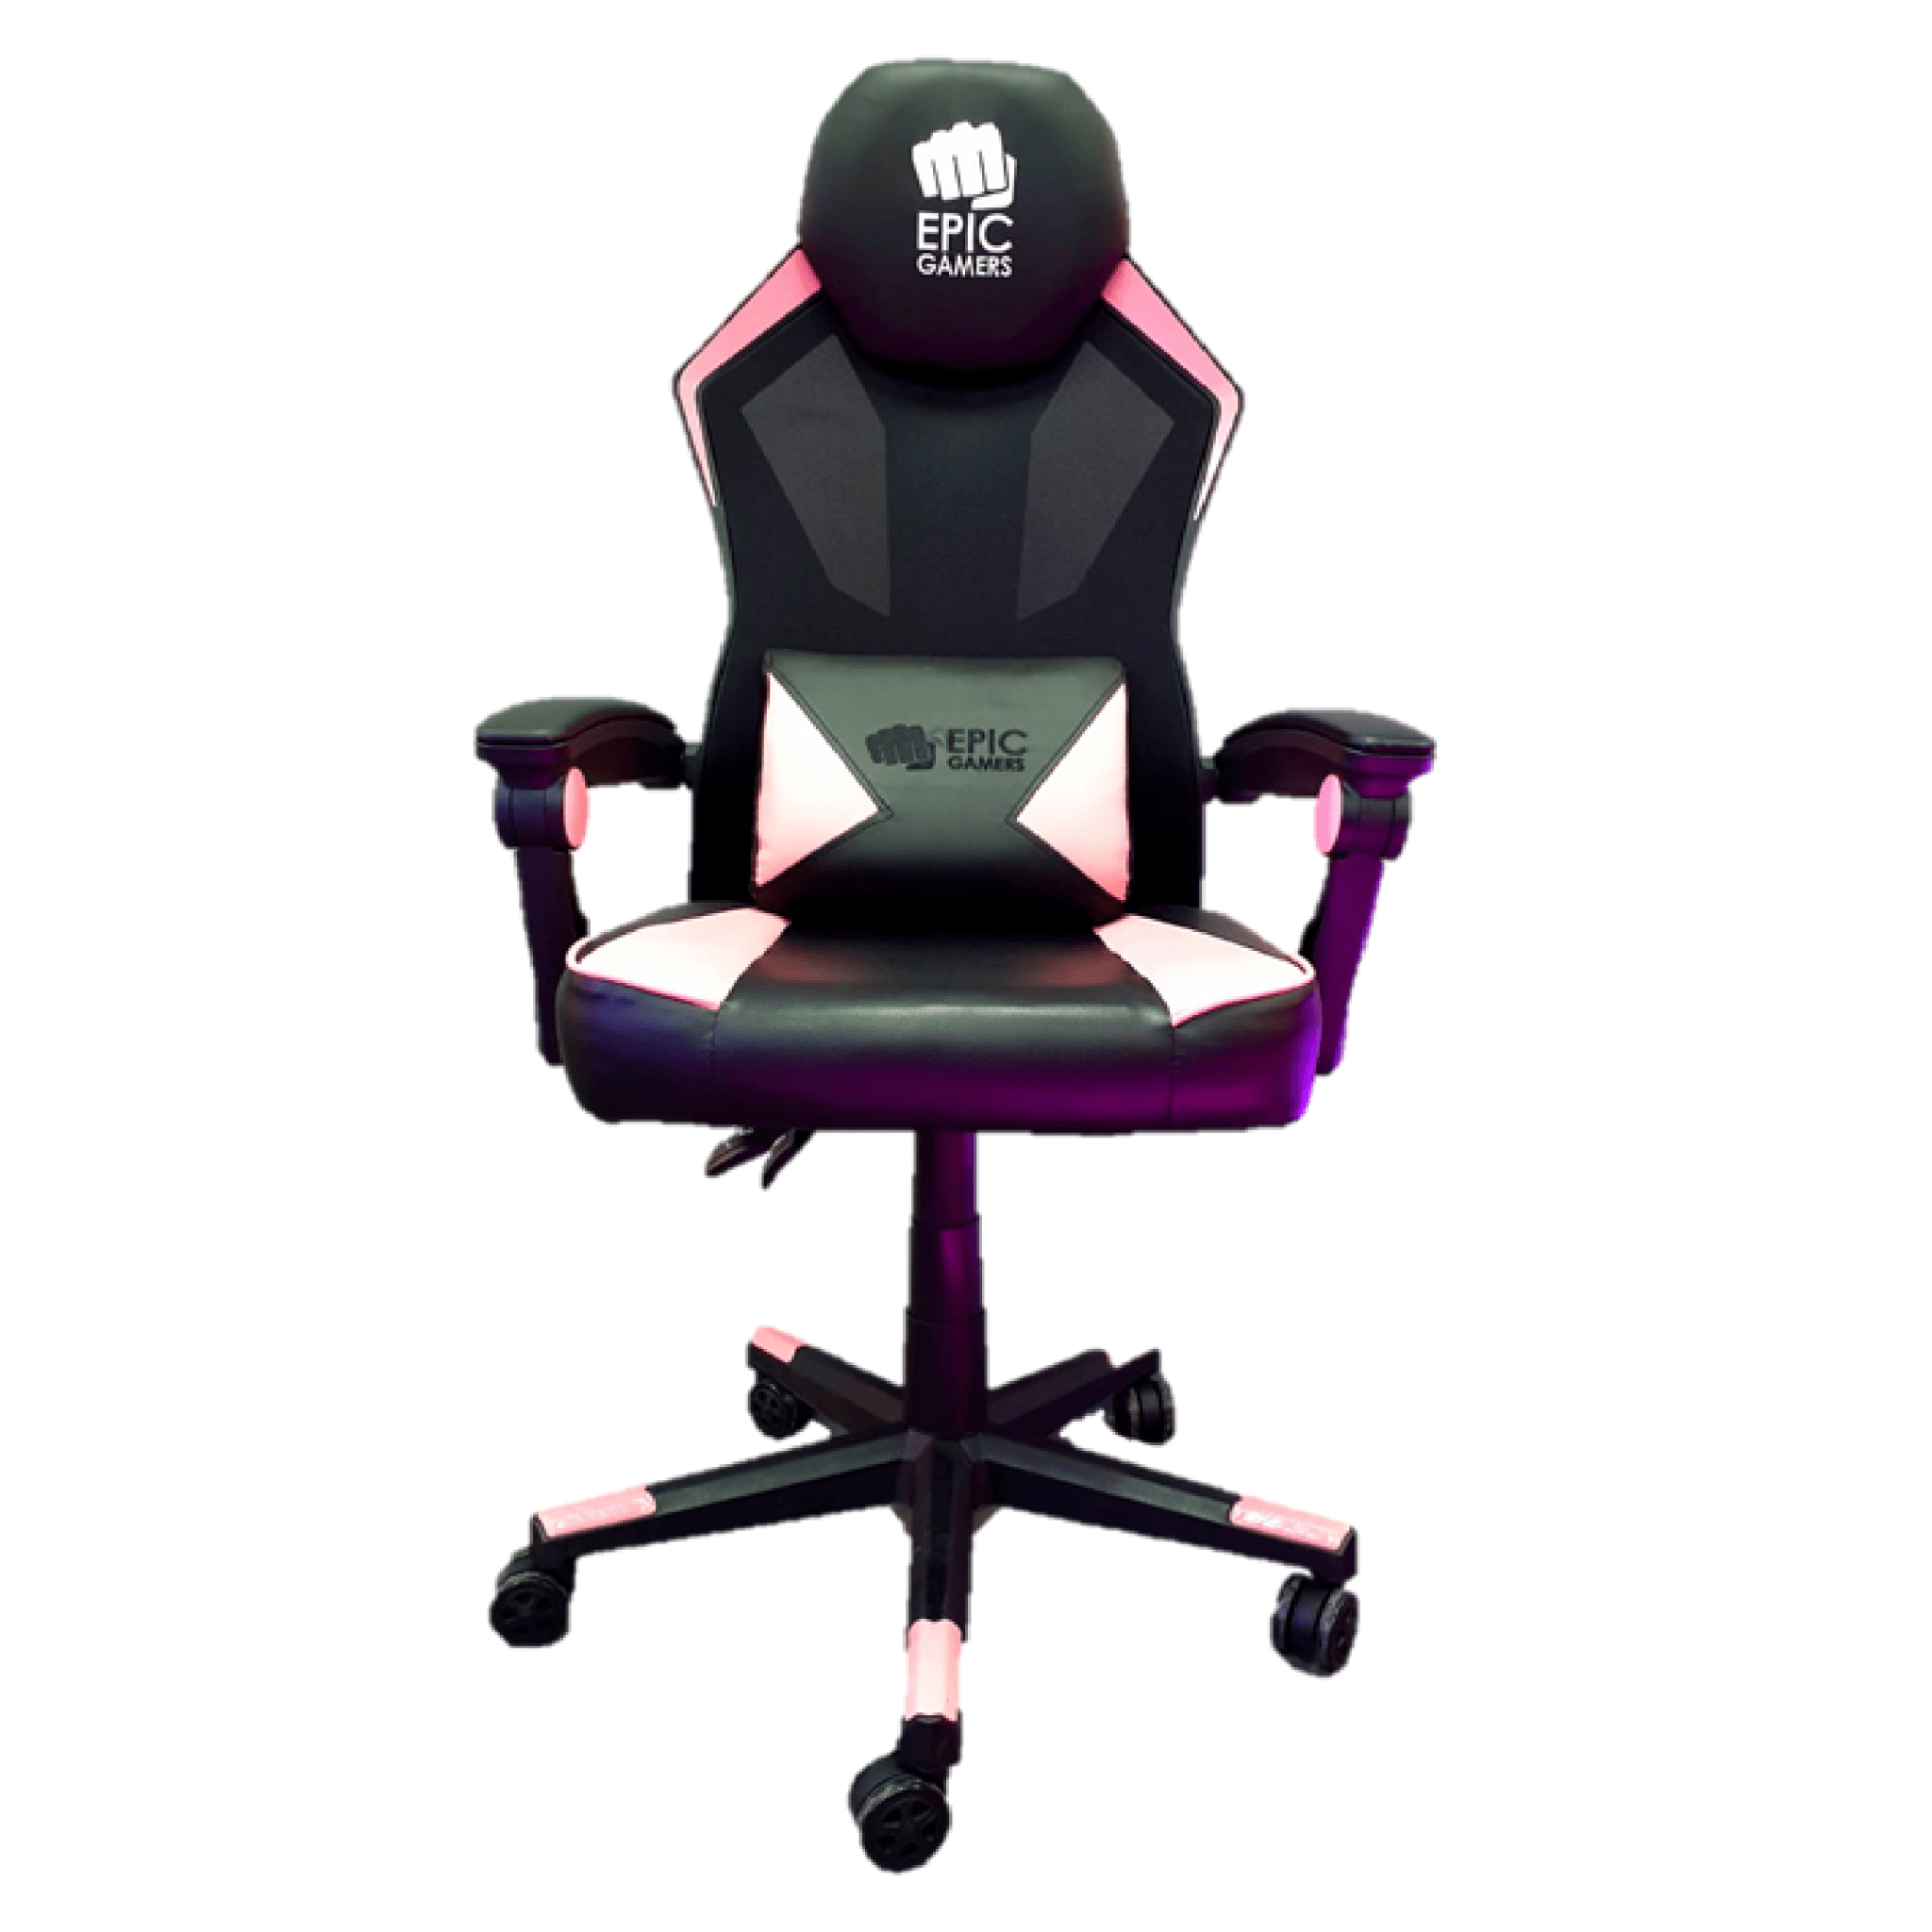 Epic Gamers Gaming Chair 001 - Black/Pink - Store 974 | ستور ٩٧٤